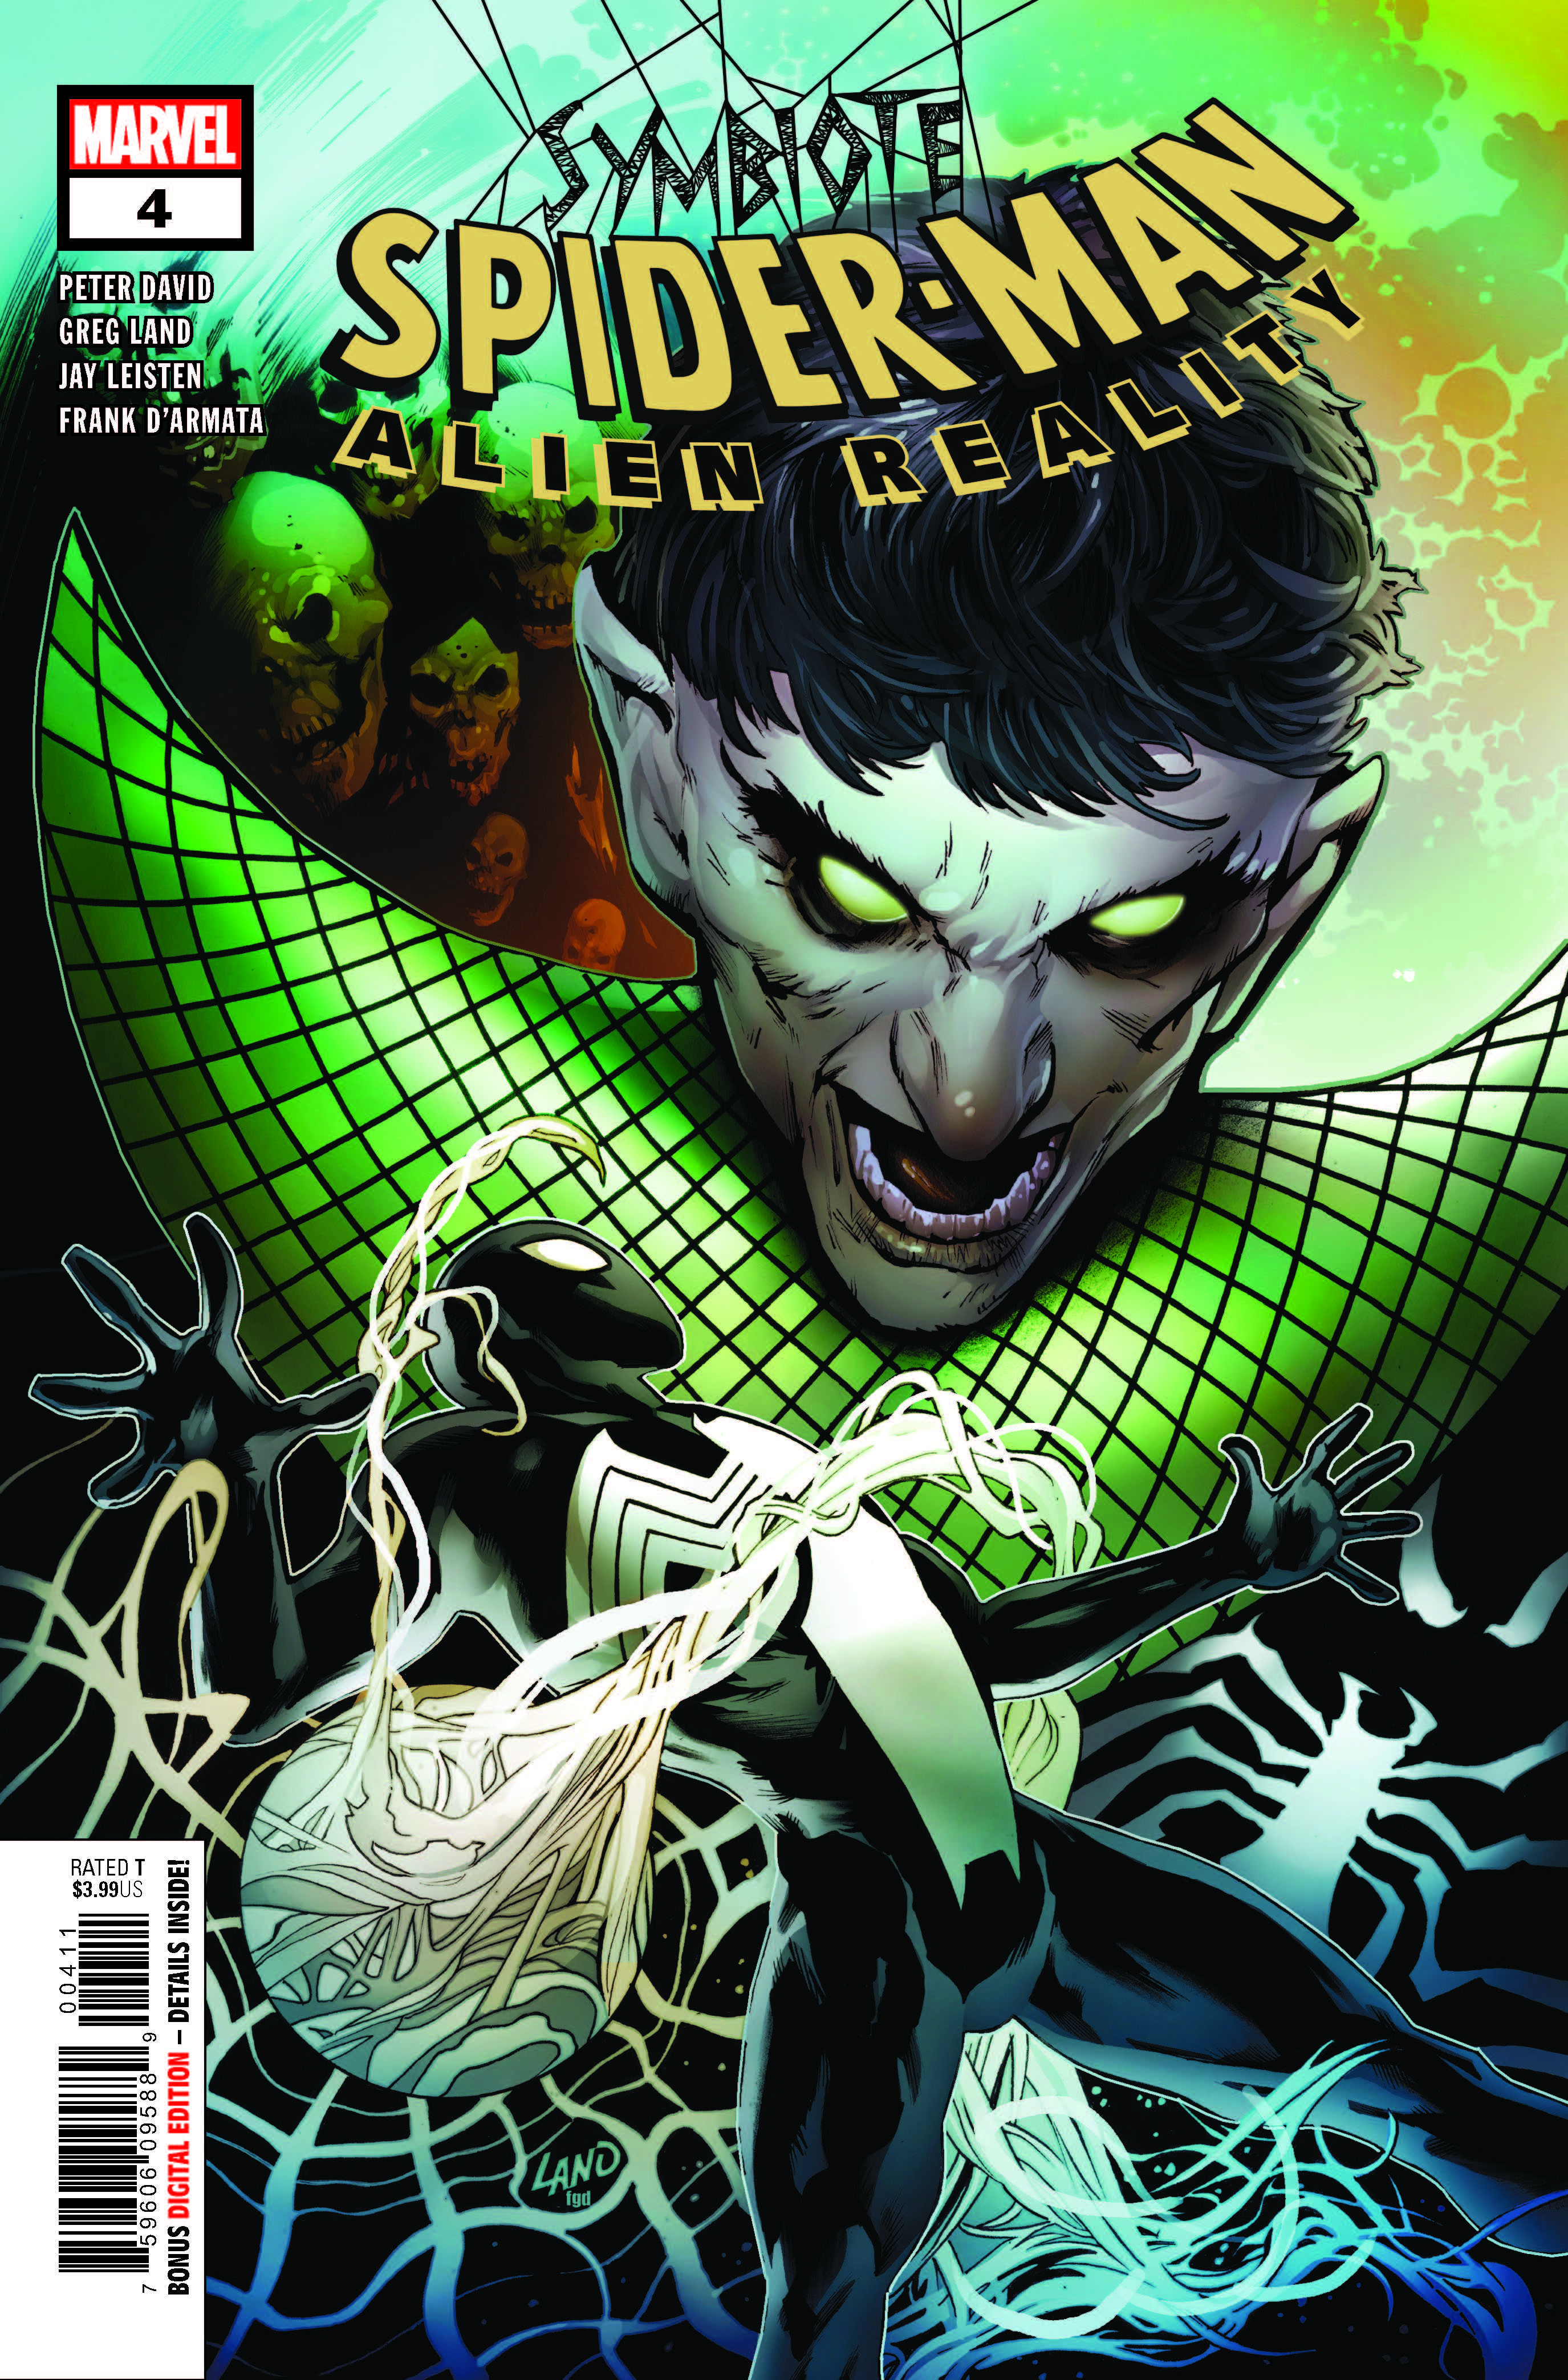 Symbiote Spider-Man Alien Reality #4 (Of 5)